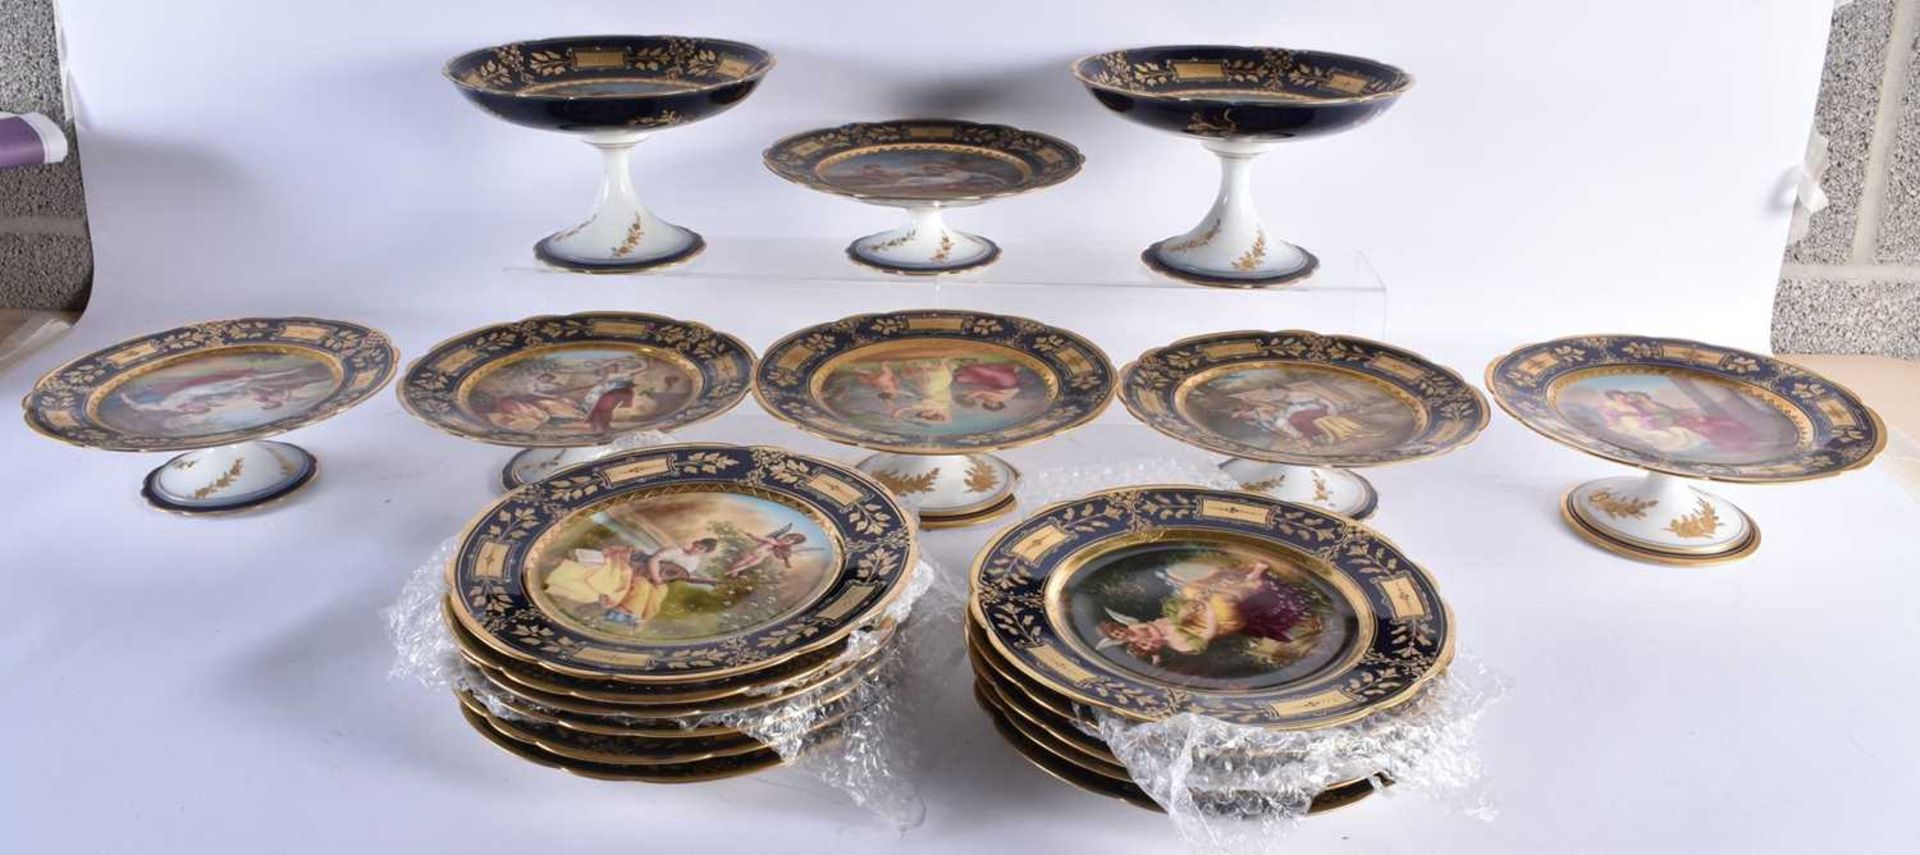 A GOOD EARLY 20TH CENTURY VIENNA PORCELAIN DESSERT SERVICE C1900 painted with figures and landscapes